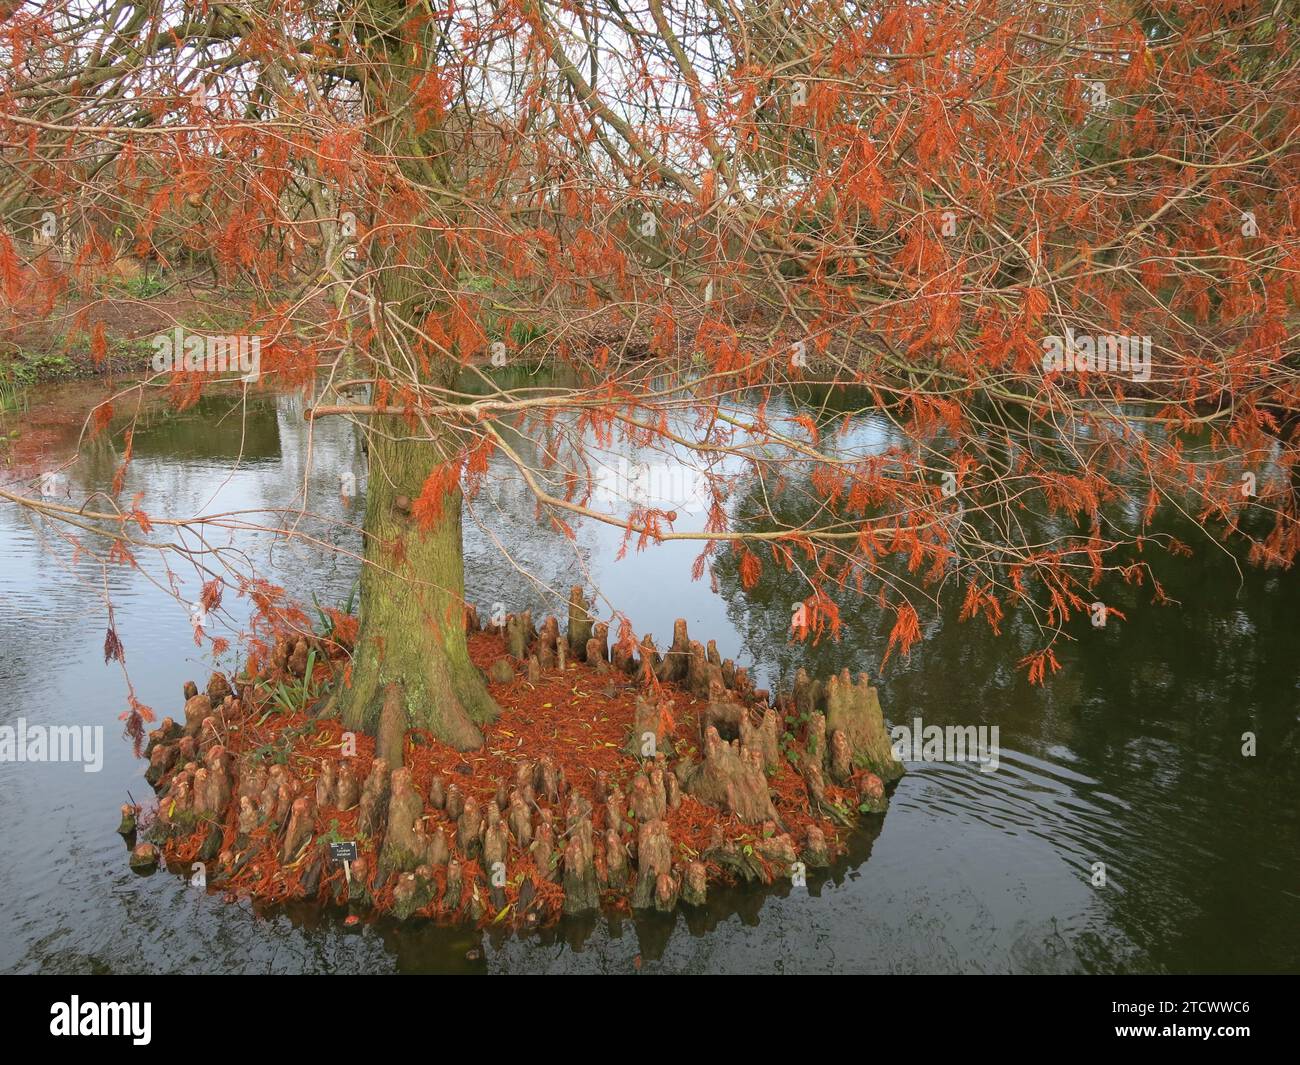 The swamp cypress Taxodium Distichum is characterised by the woody projections or knees at the base of the tree and the russet red foliage in winter. Stock Photo